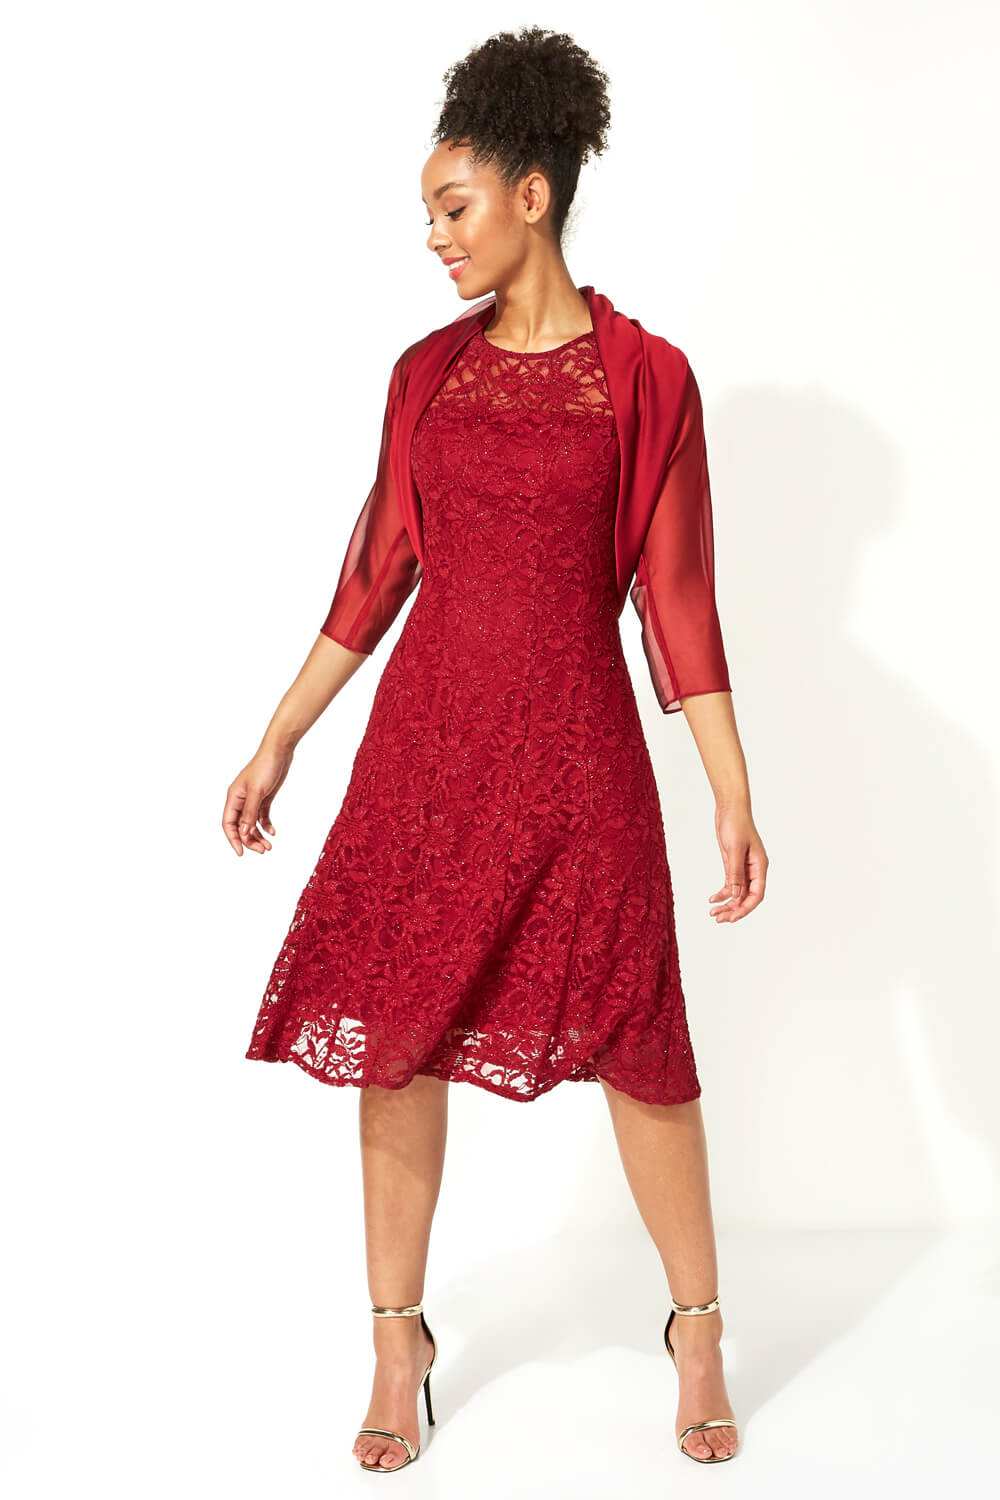 Glitter Lace and Flare Dress in Red - Roman Originals UK